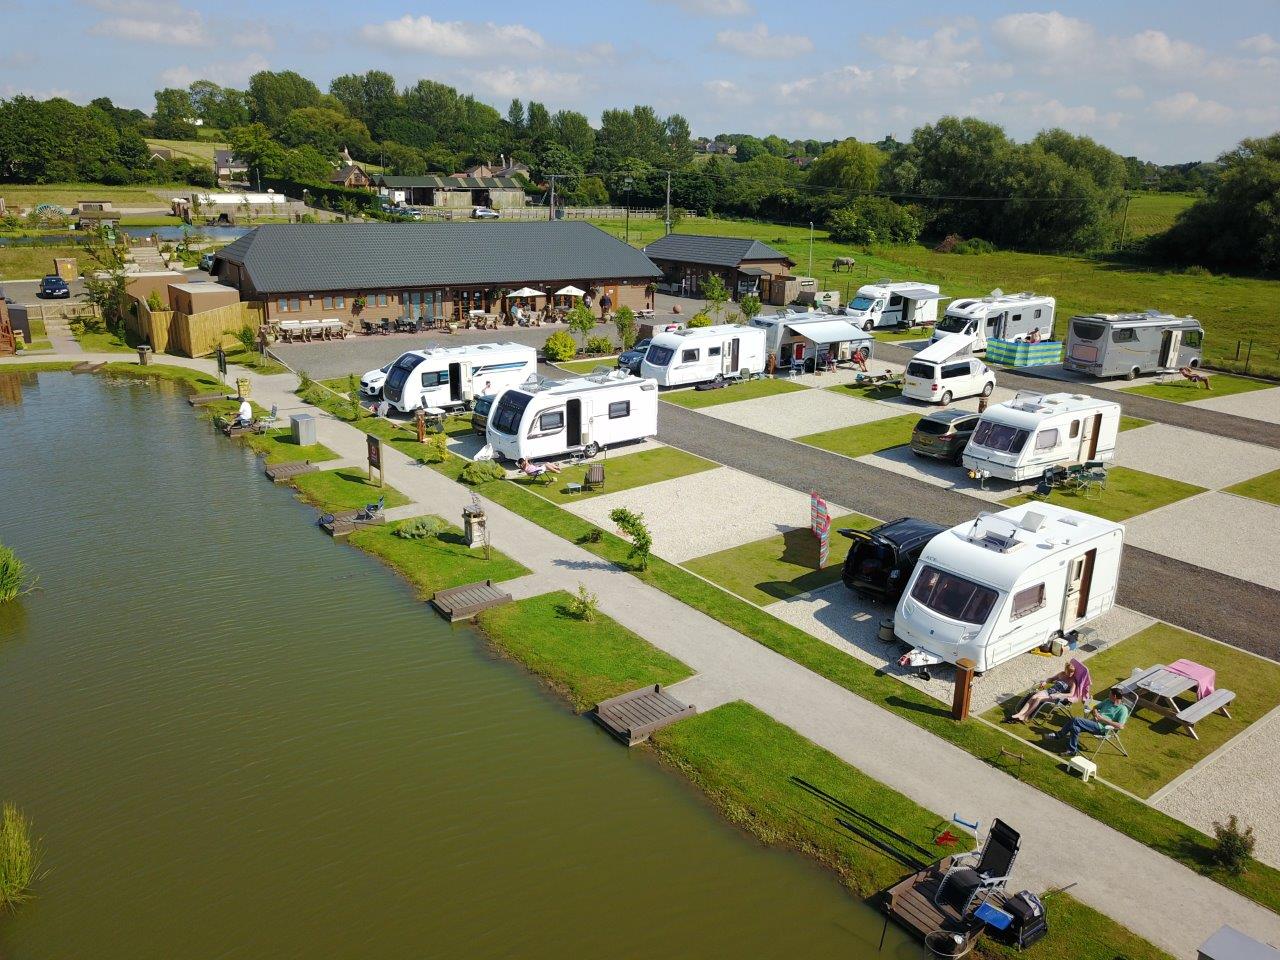 Sheffield investor acquires holiday park in £2m deal